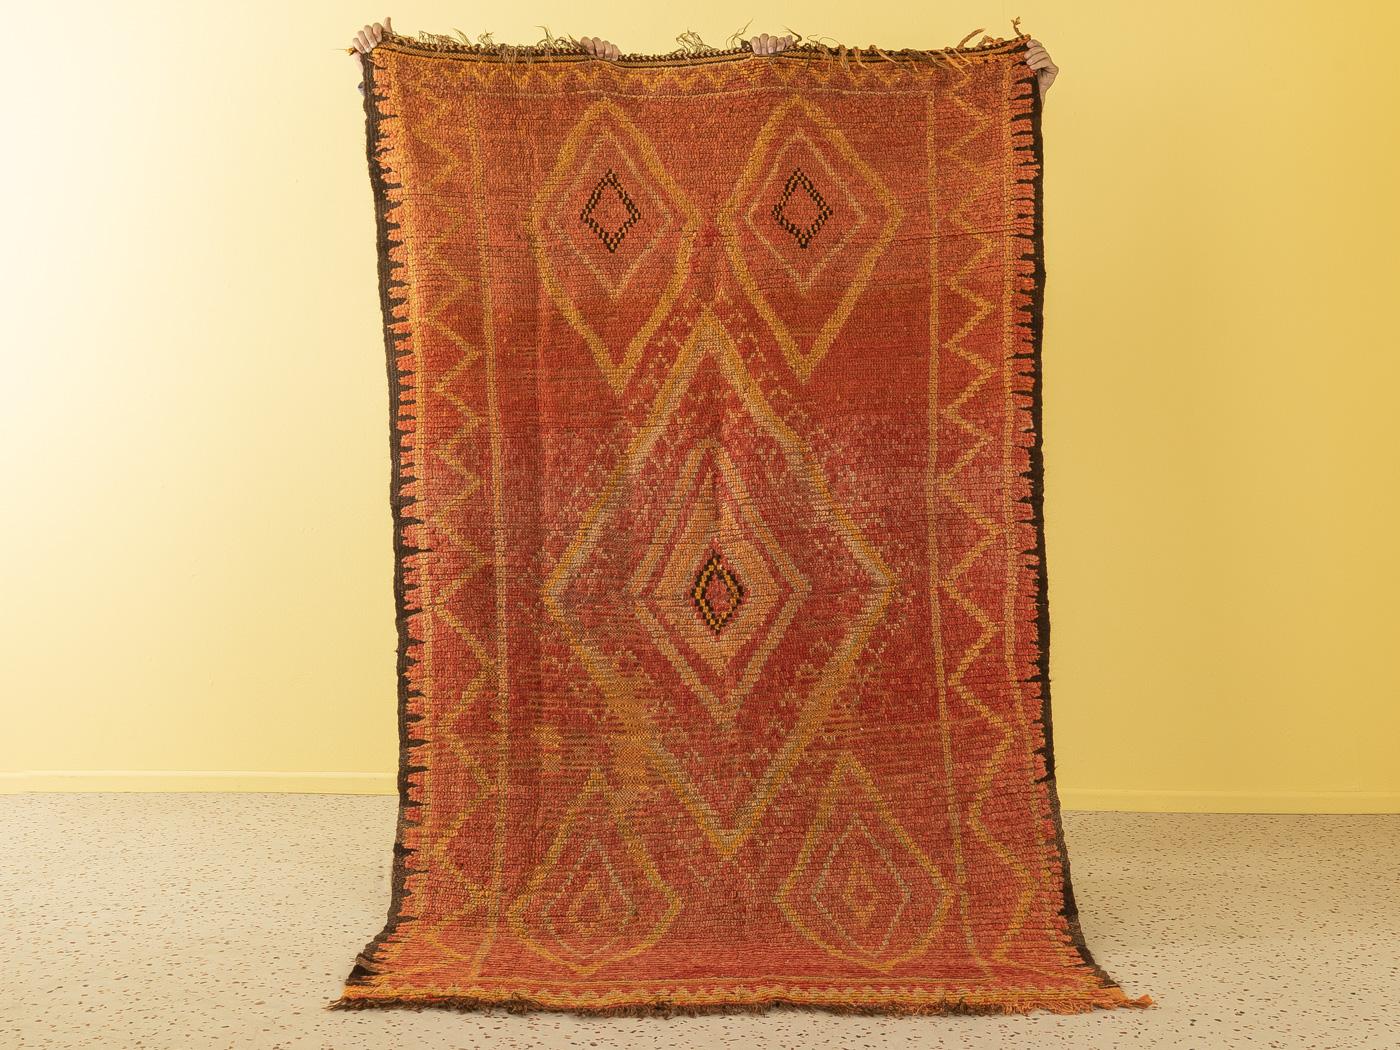 This Vintage Rehamna is a 100% wool rug – soft and comfortable underfoot. Our Berber rugs are handmade, one knot at a time. Each of our Berber rugs is a long-lasting one-of-a-kind piece, created in a sustainable manner with local wool.
Quality